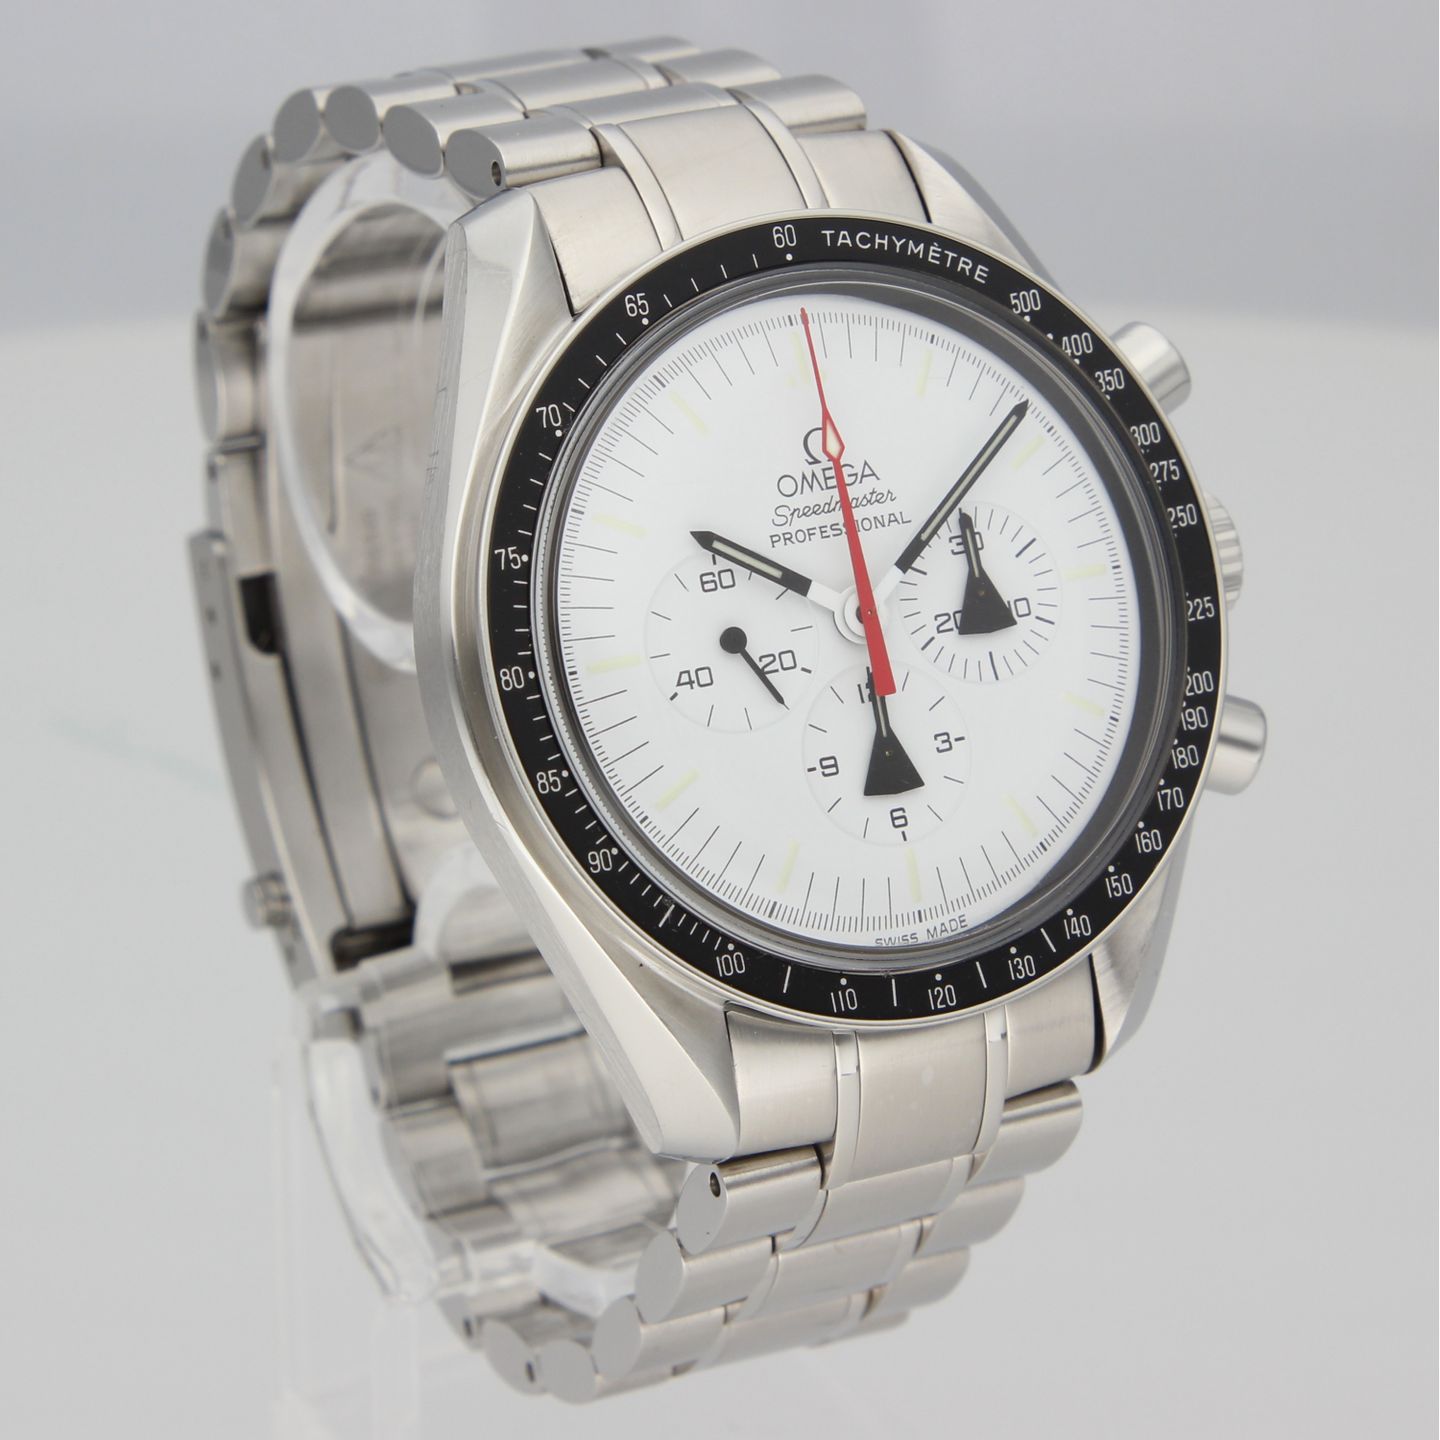 Omega Speedmaster Professional Moonwatch 311.32.42.30.04.001 (2008) - White dial 42 mm Steel case (5/8)